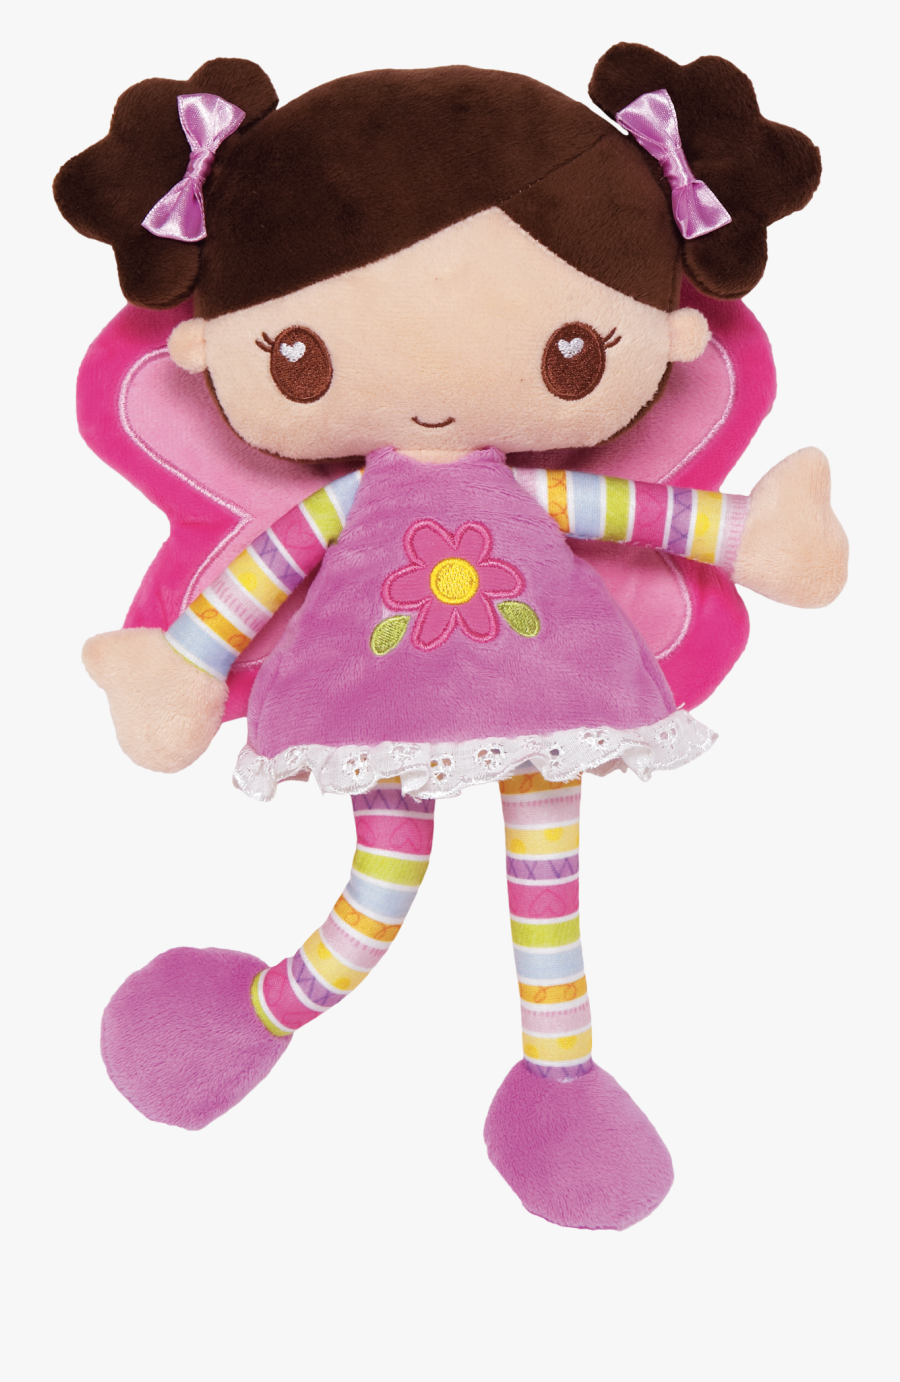 Dall Clipart Stuffed Toy - Doll Stuff Toy Transparent, Transparent Clipart